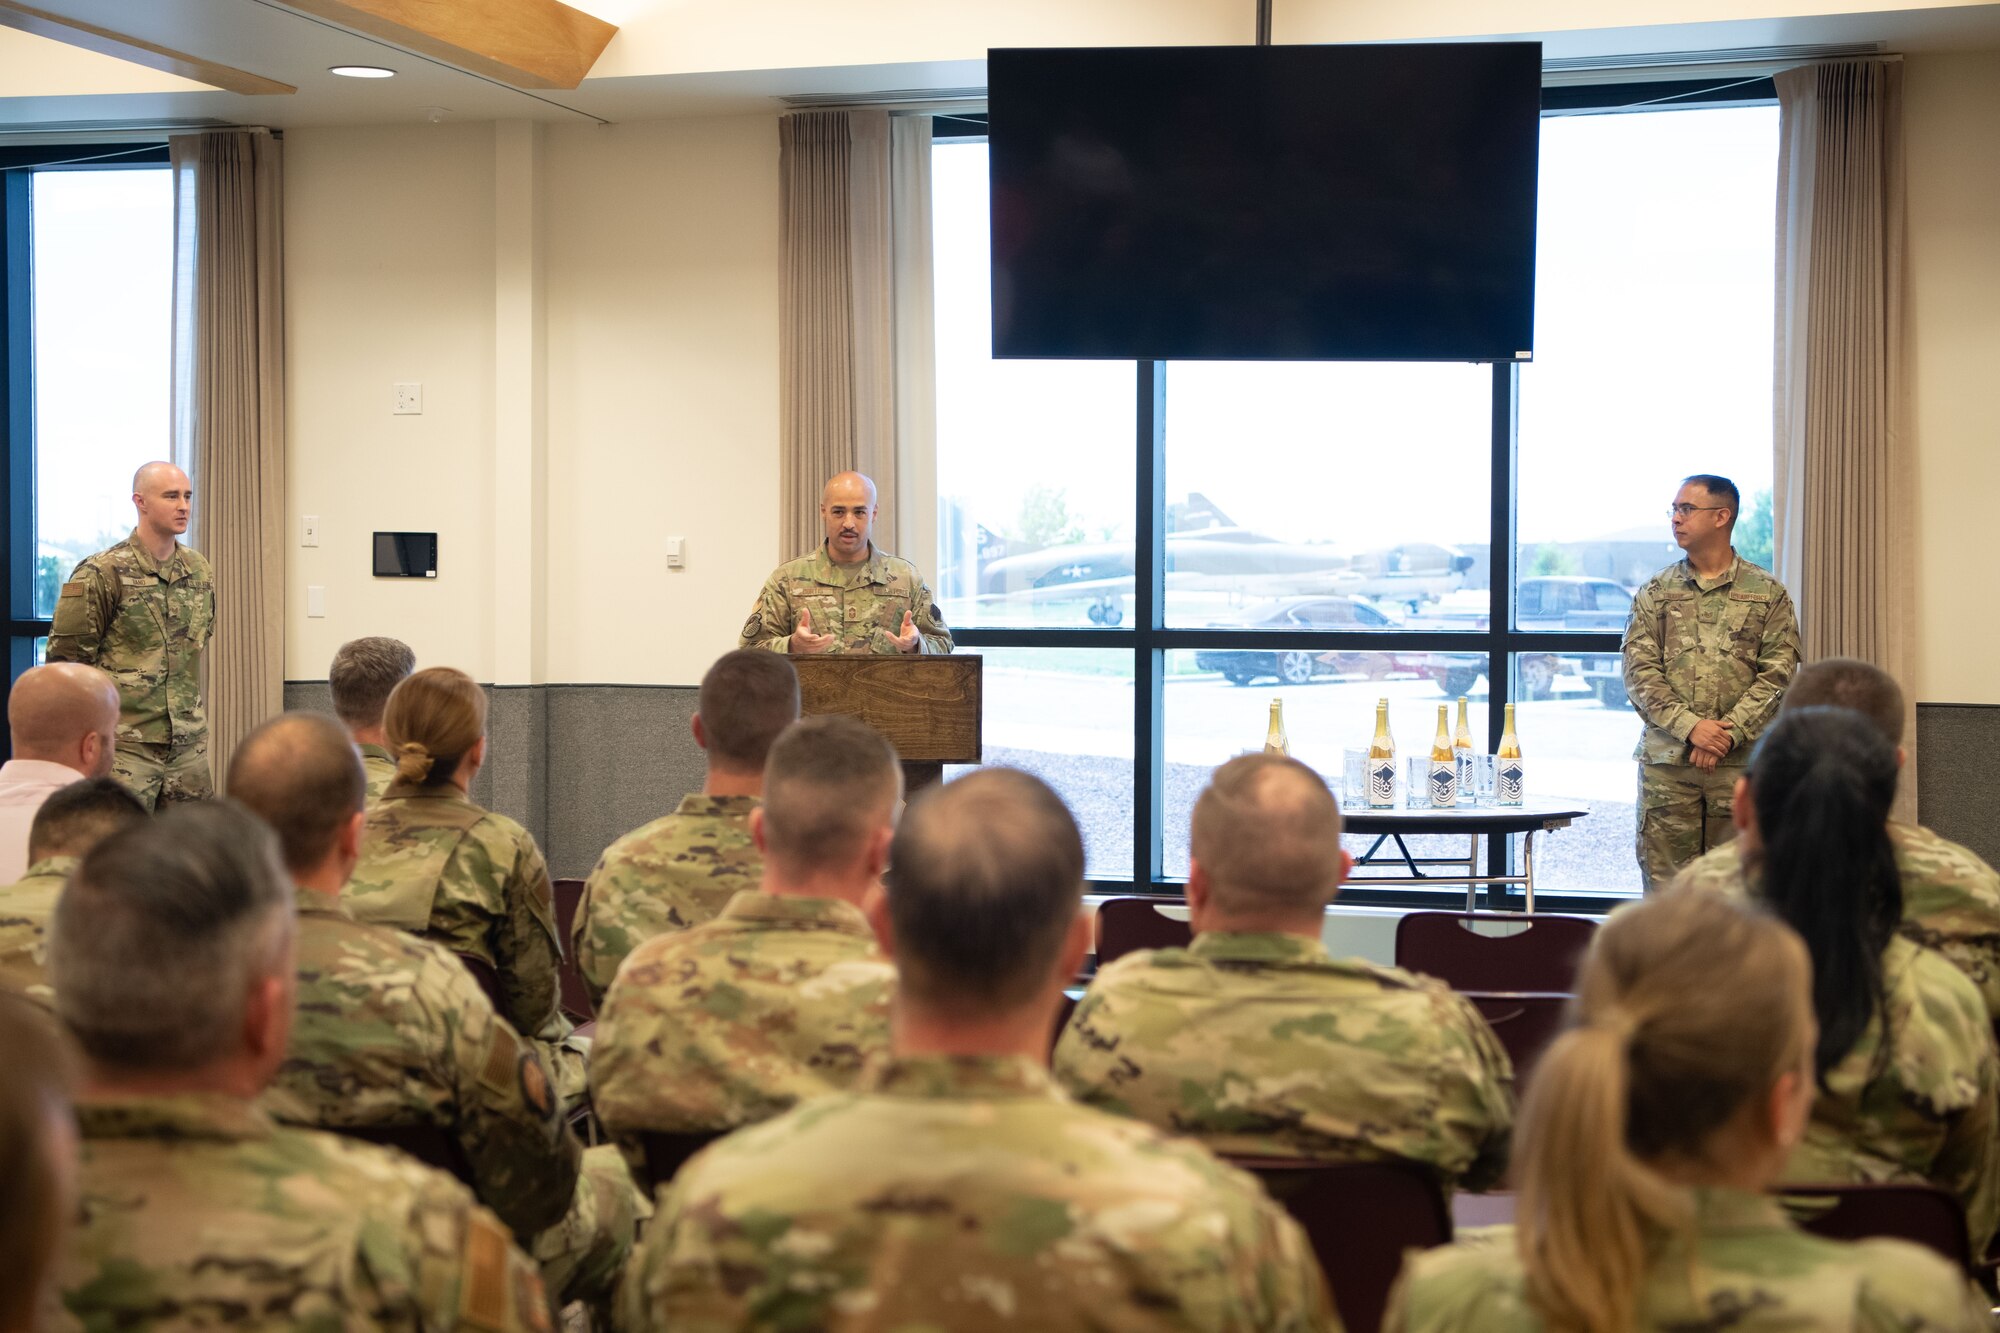 Chief Master Sgt. Archie Curtis, senior enlisted leader of the 566th Intelligence Squadron, addresses the audience during the master sergeant promotion release ceremony June 2, 2022 at Buckley Space Force Base, Colo.